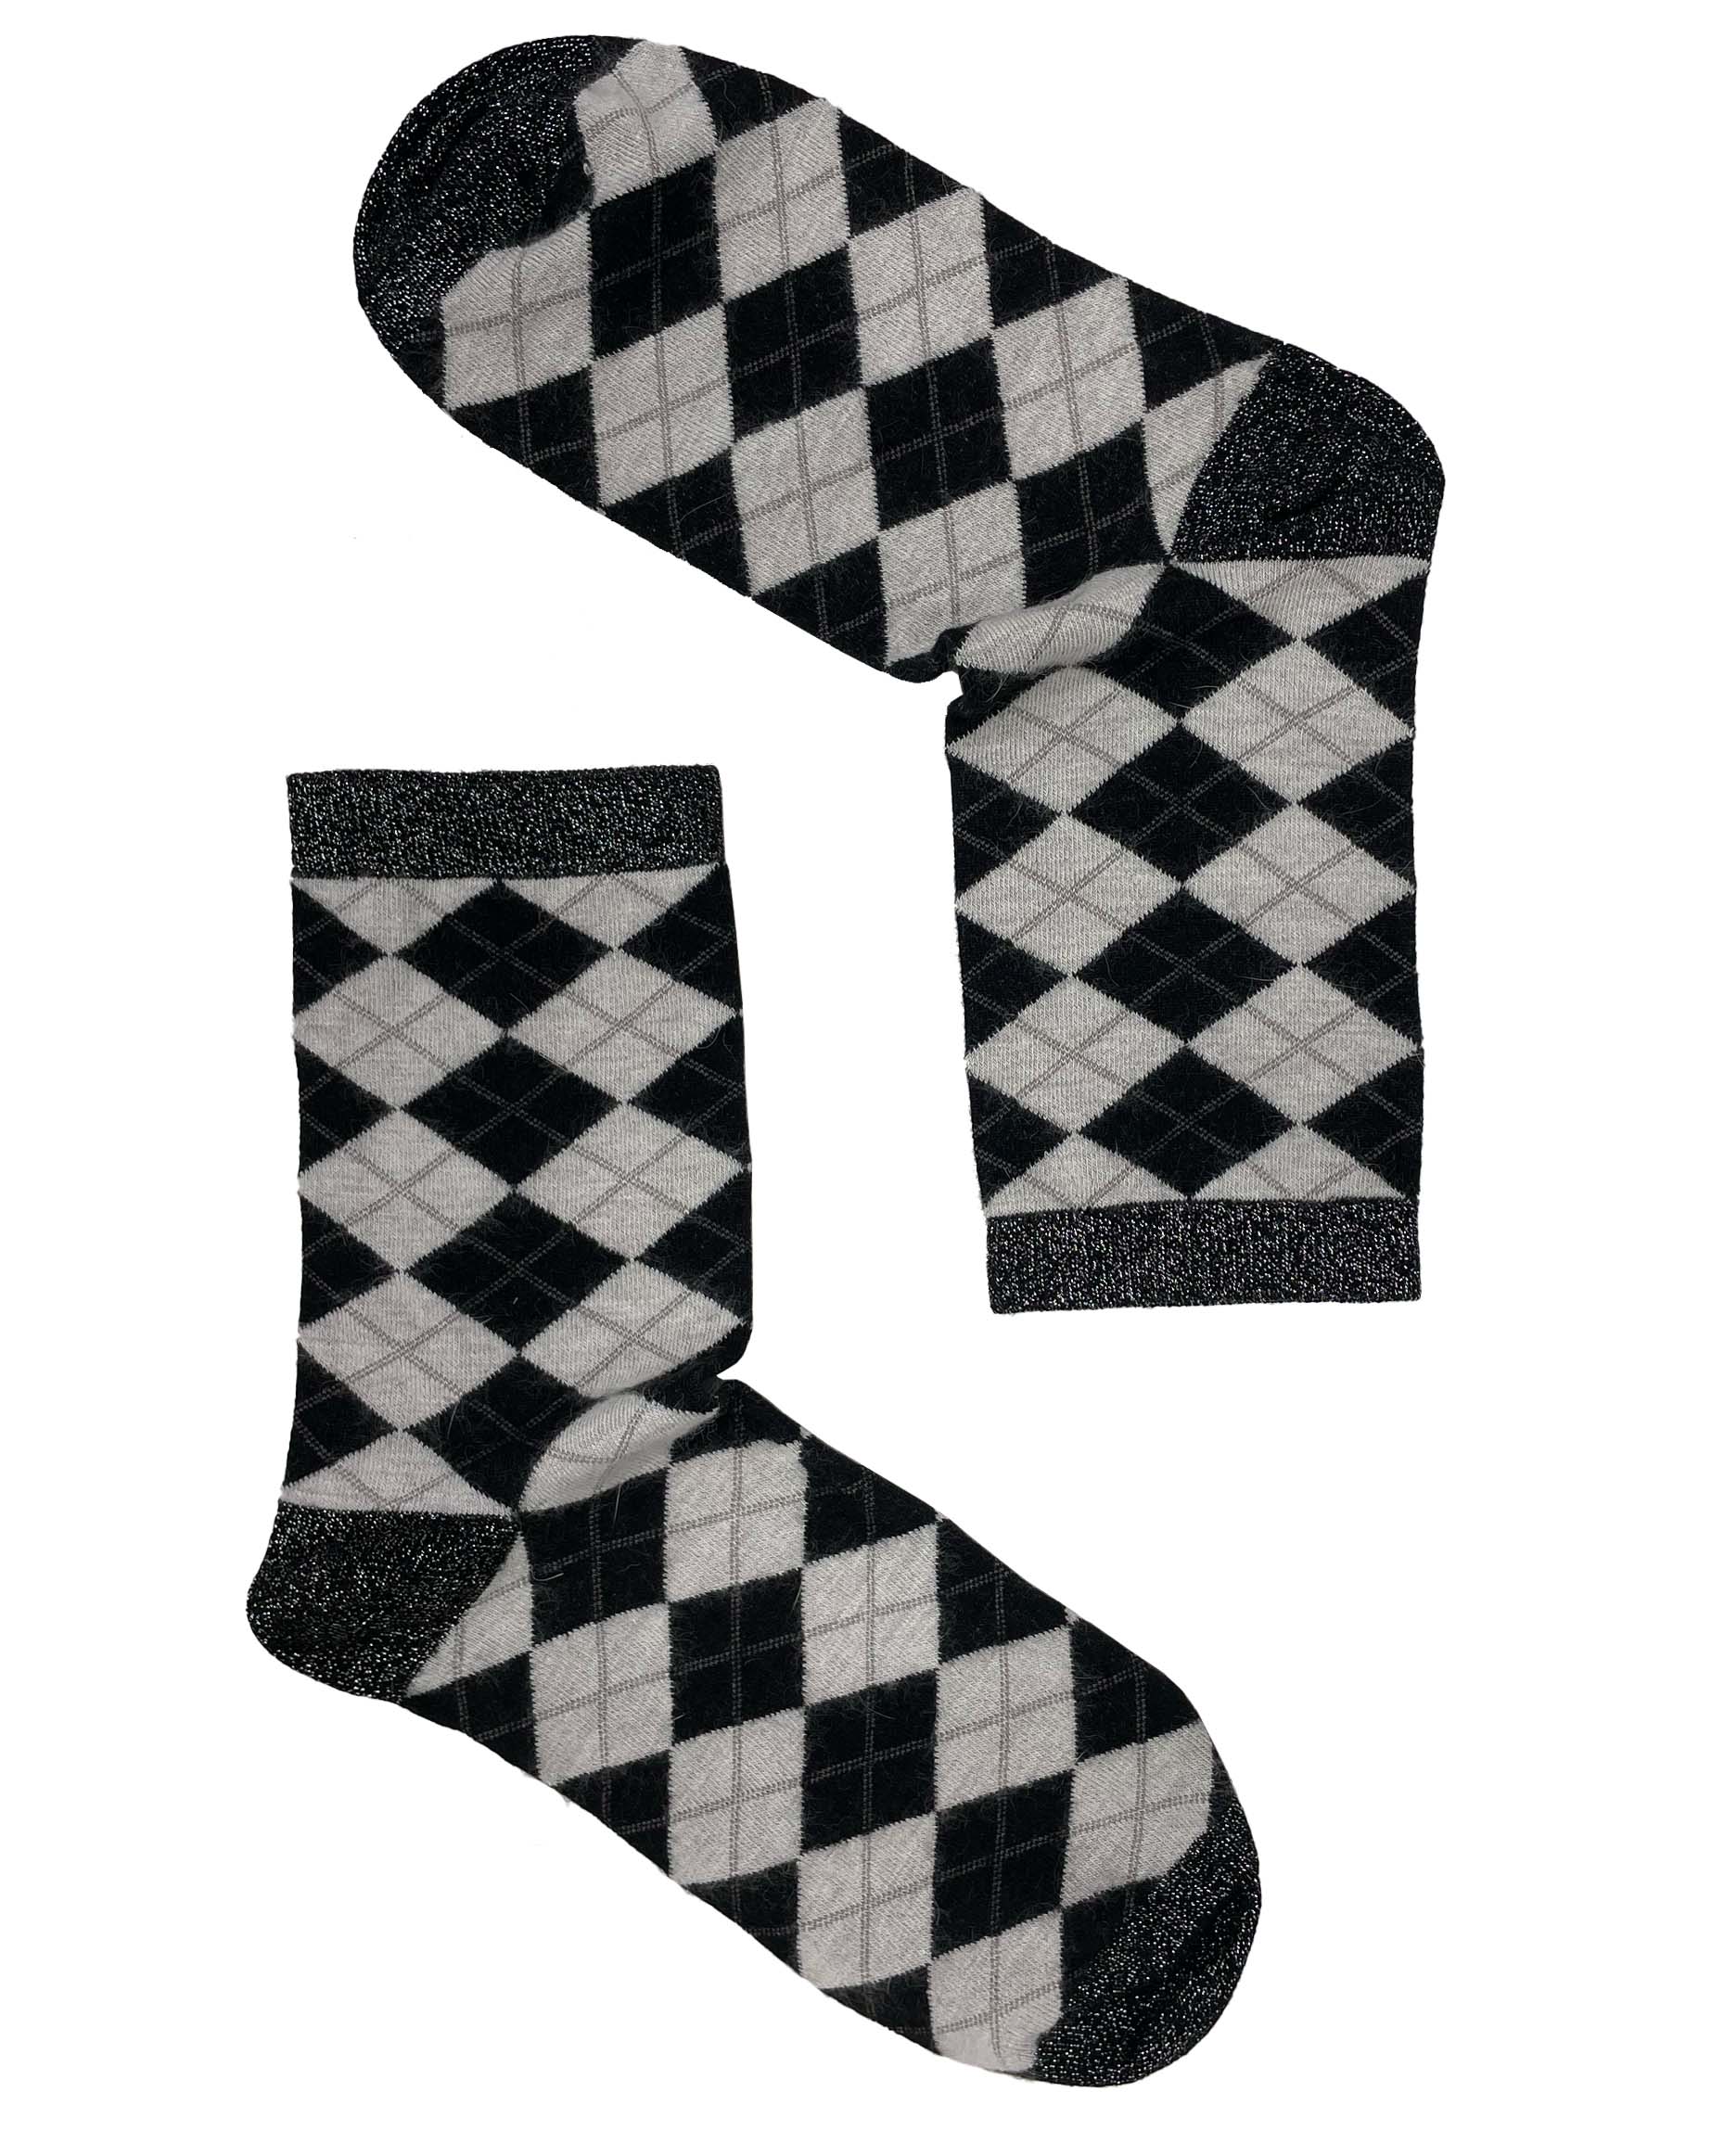 SiSi Scottish Sock - Warm and soft angora mix ankle socks with a diamond tartan / argyle pattern in black and light grey with silver lamé cuff, heel and toe.